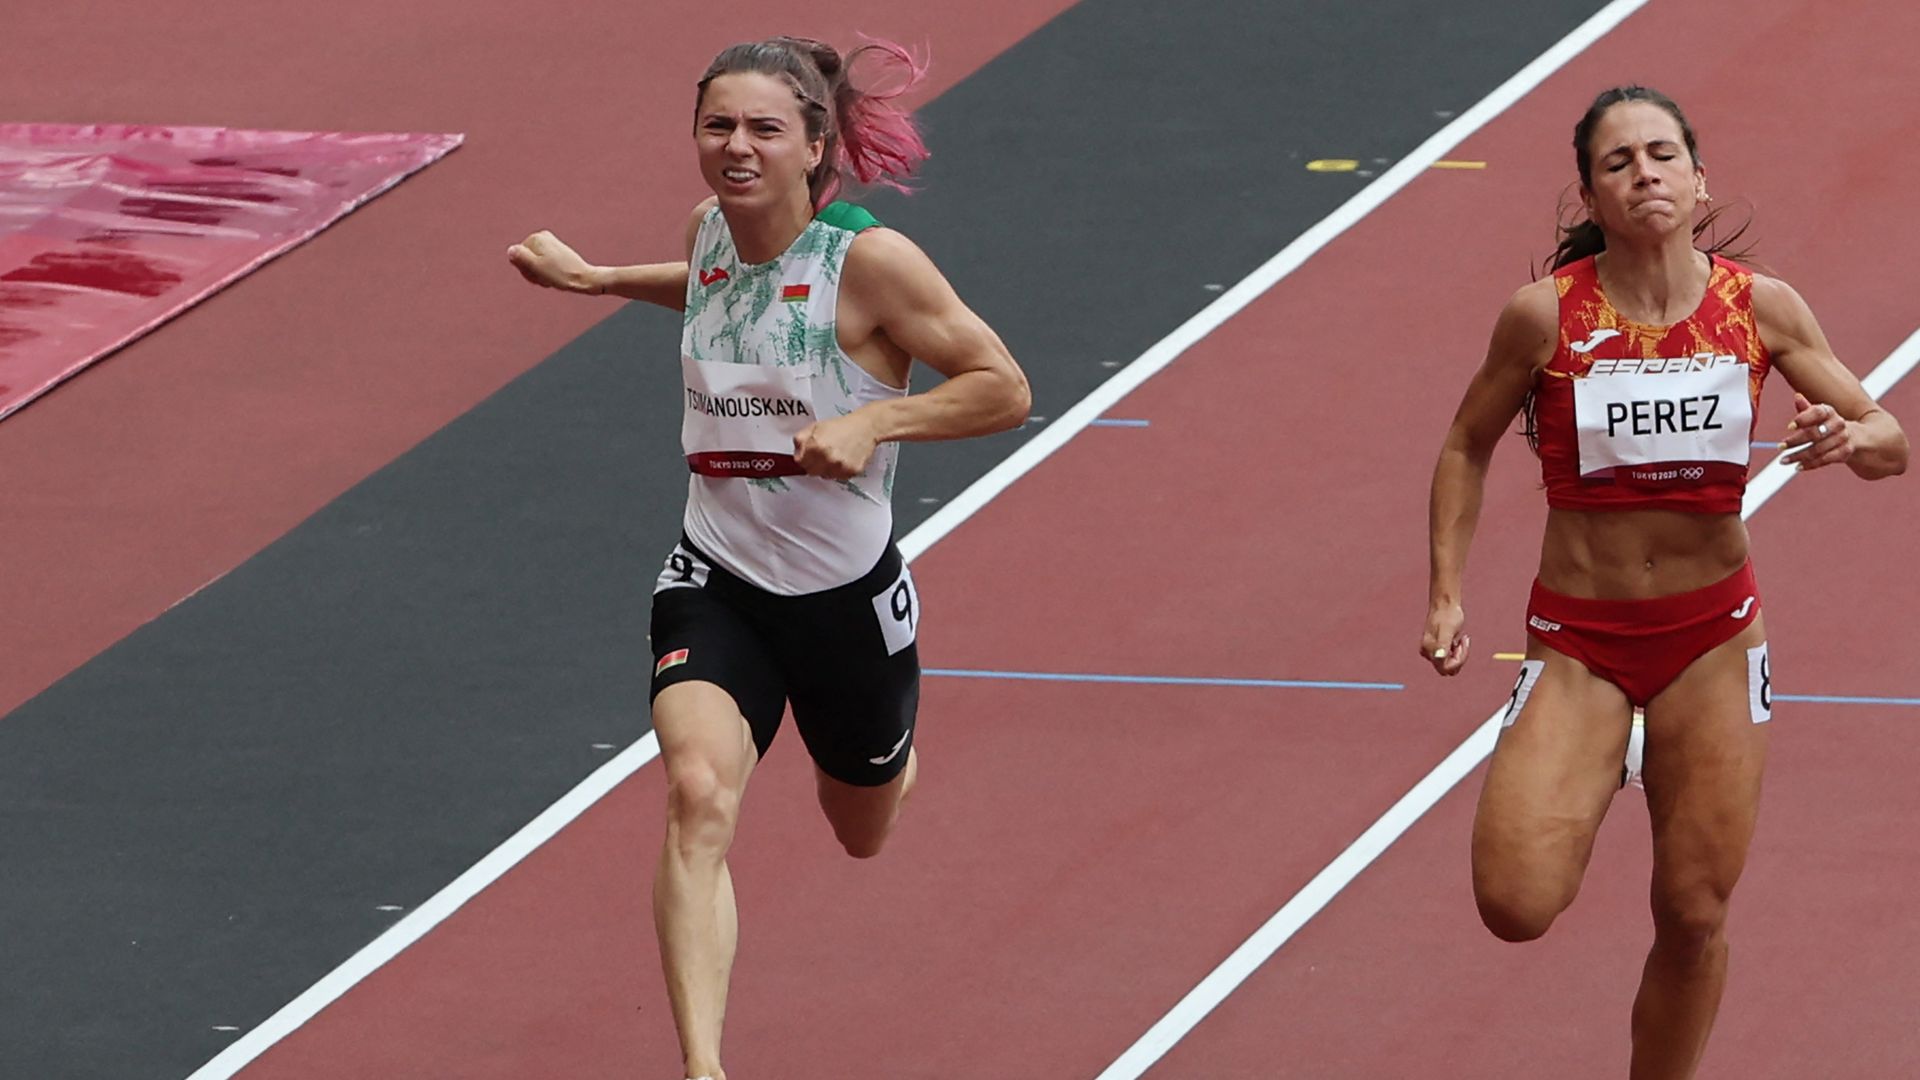 This file photo taken on July 30, 2021 shows Belarus' Krystsina Tsimanouskaya (L) and Spain's Maria Isabel Perez competing in the women's 100m heats 